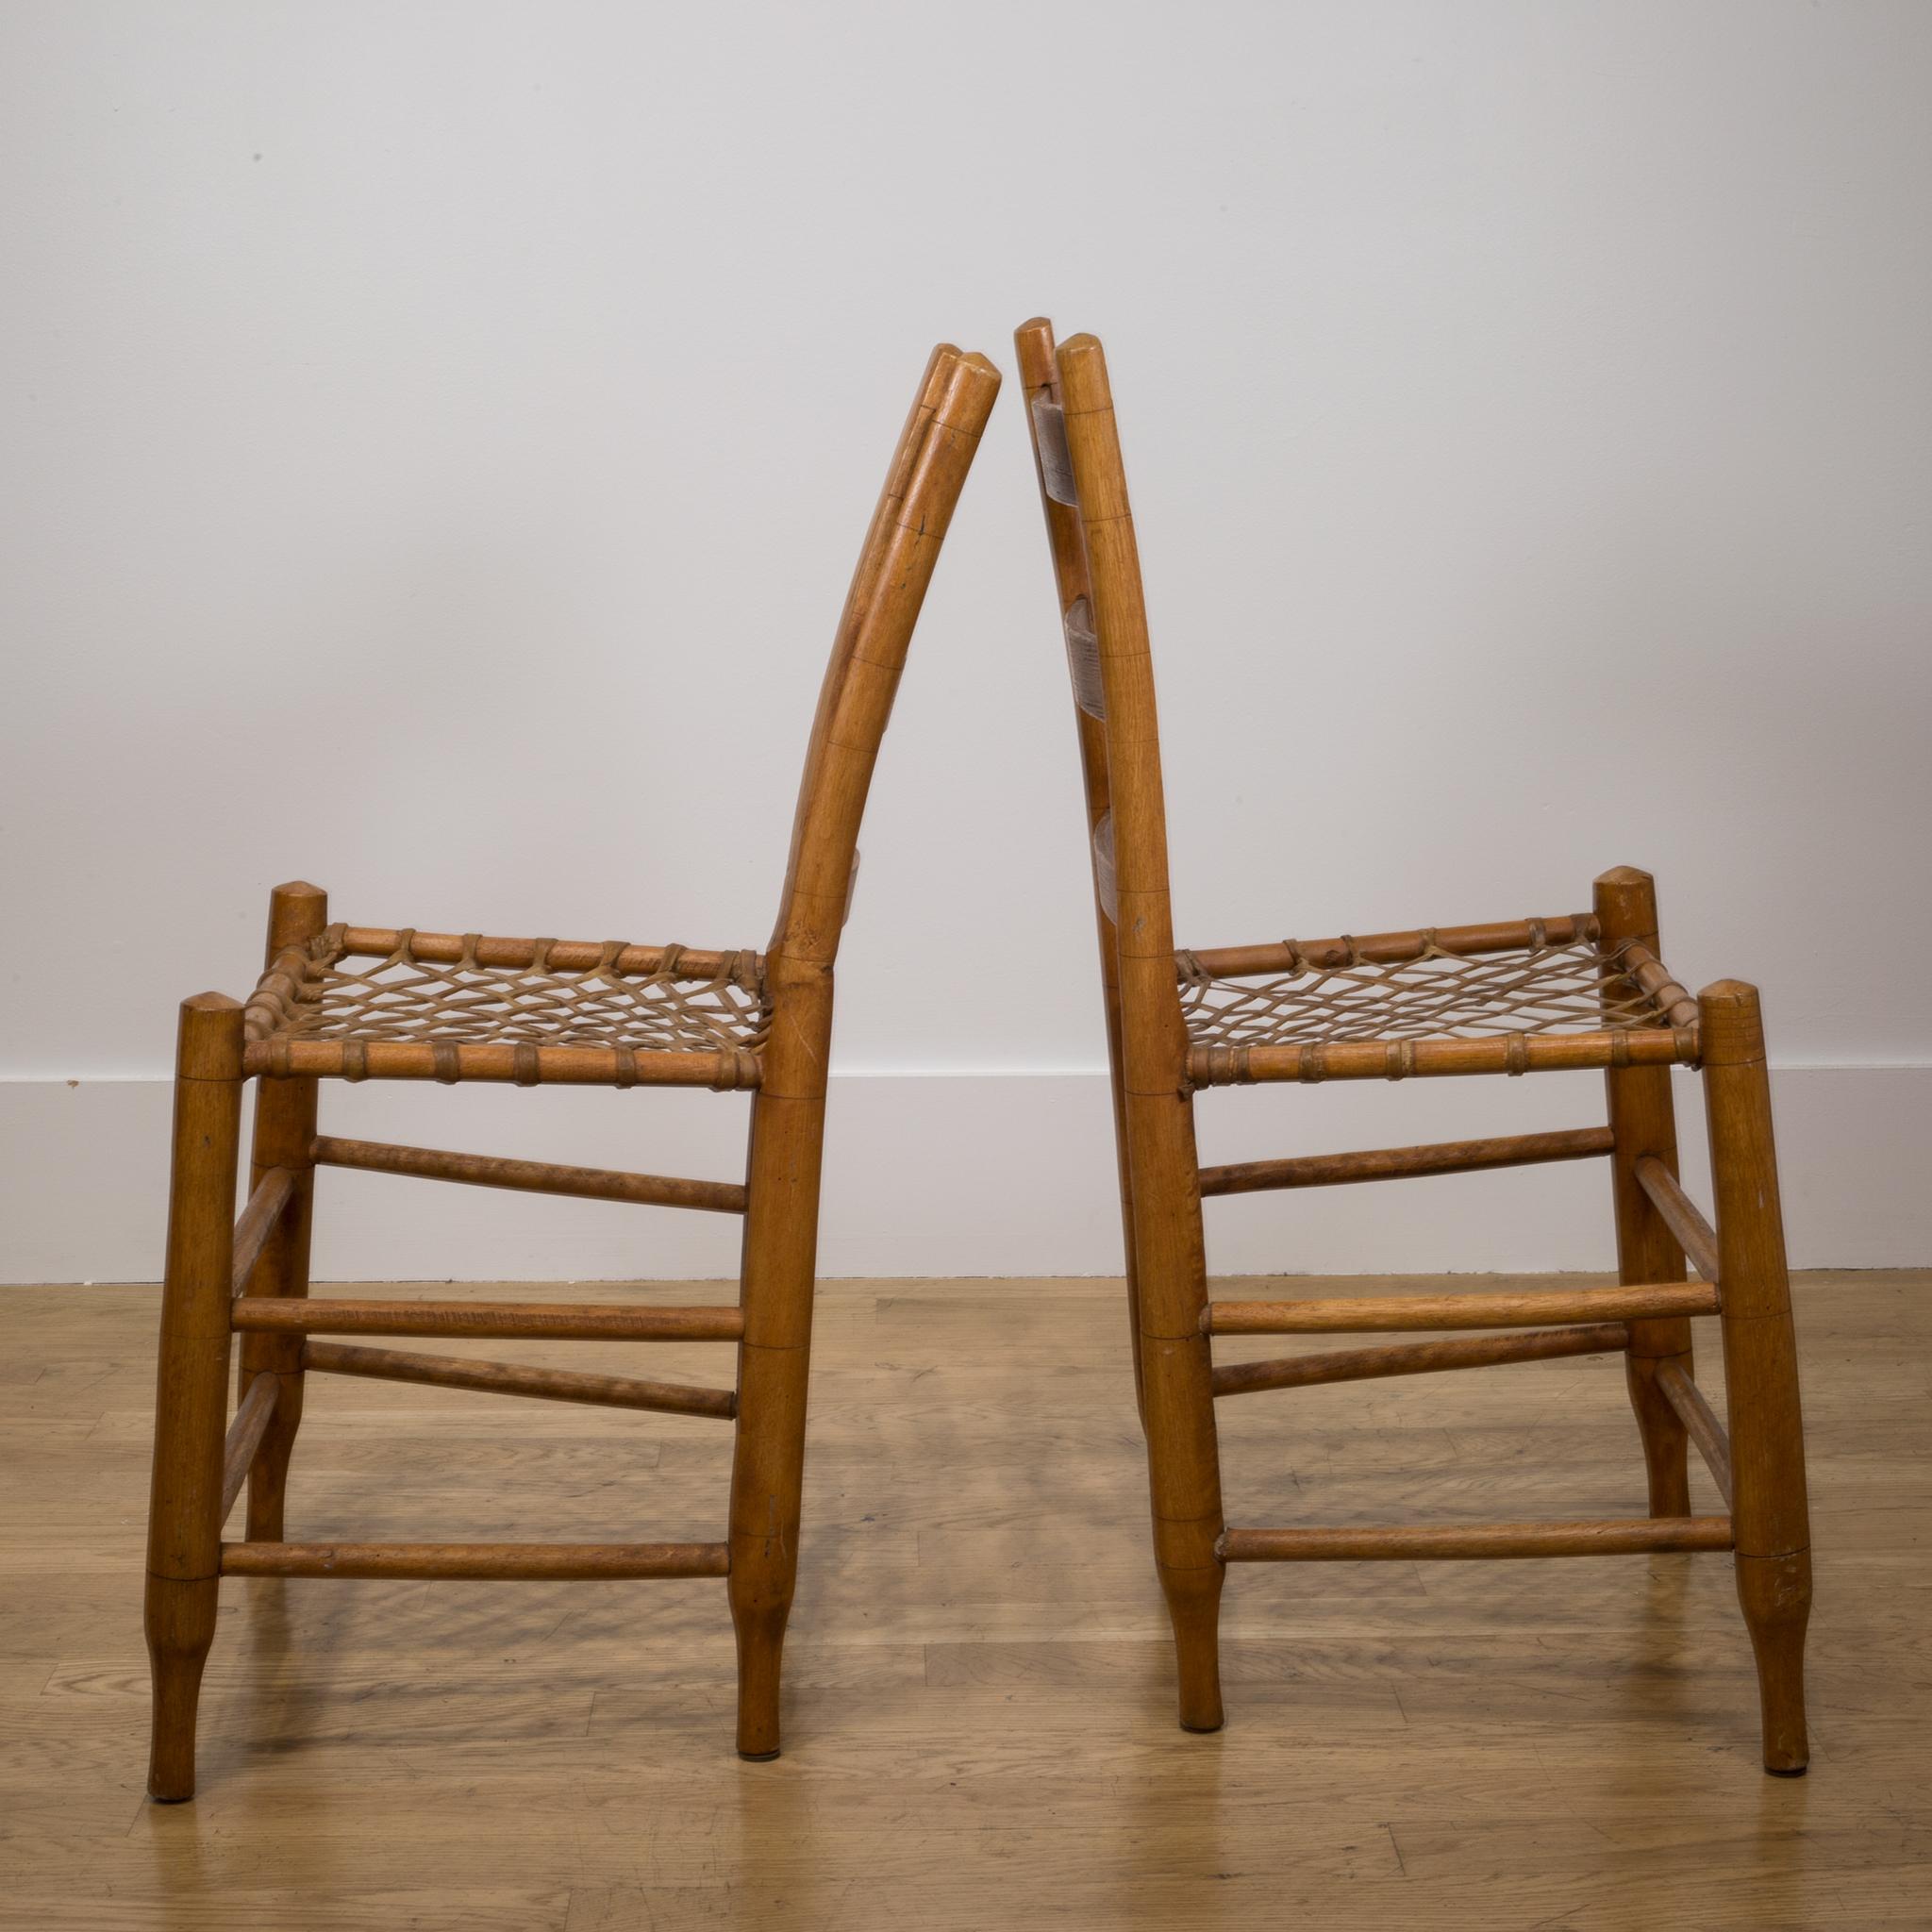 19th c. Handmade Wood/Rawhide Chairs from Historic  Oregon Commune c. 1856-1866 9